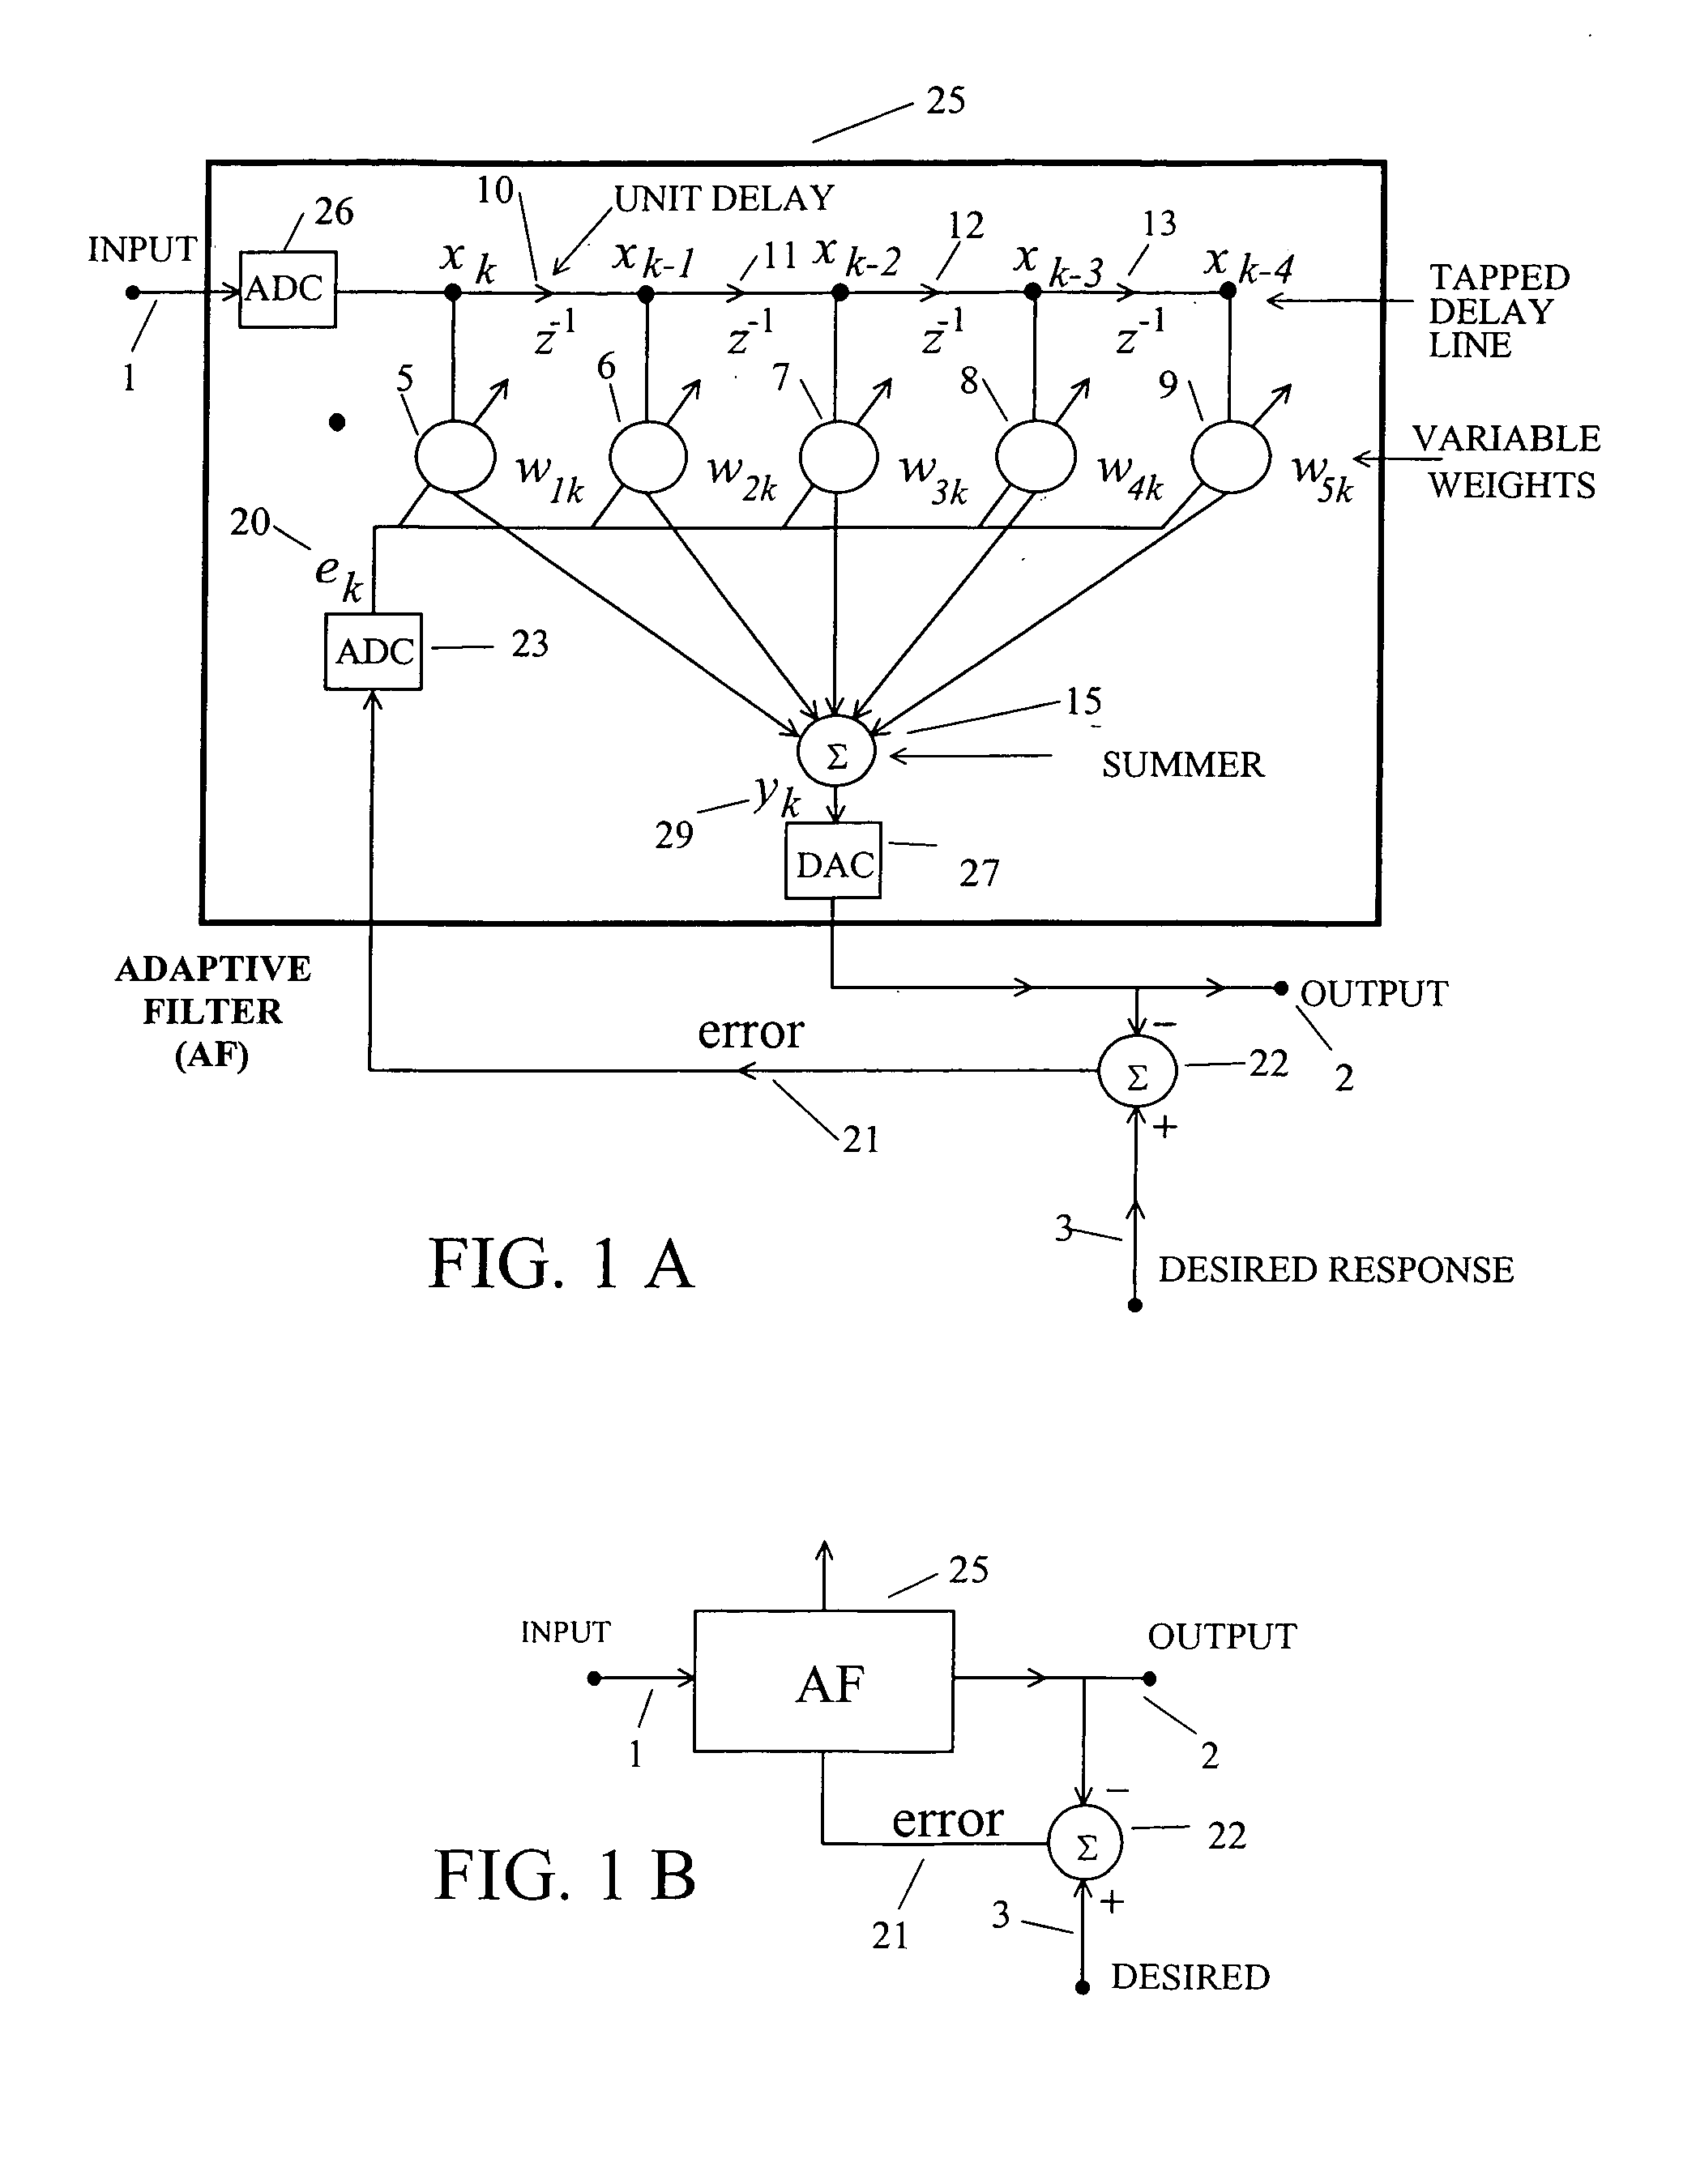 Simultaneous two-way transmission of information signals in the same frequency band